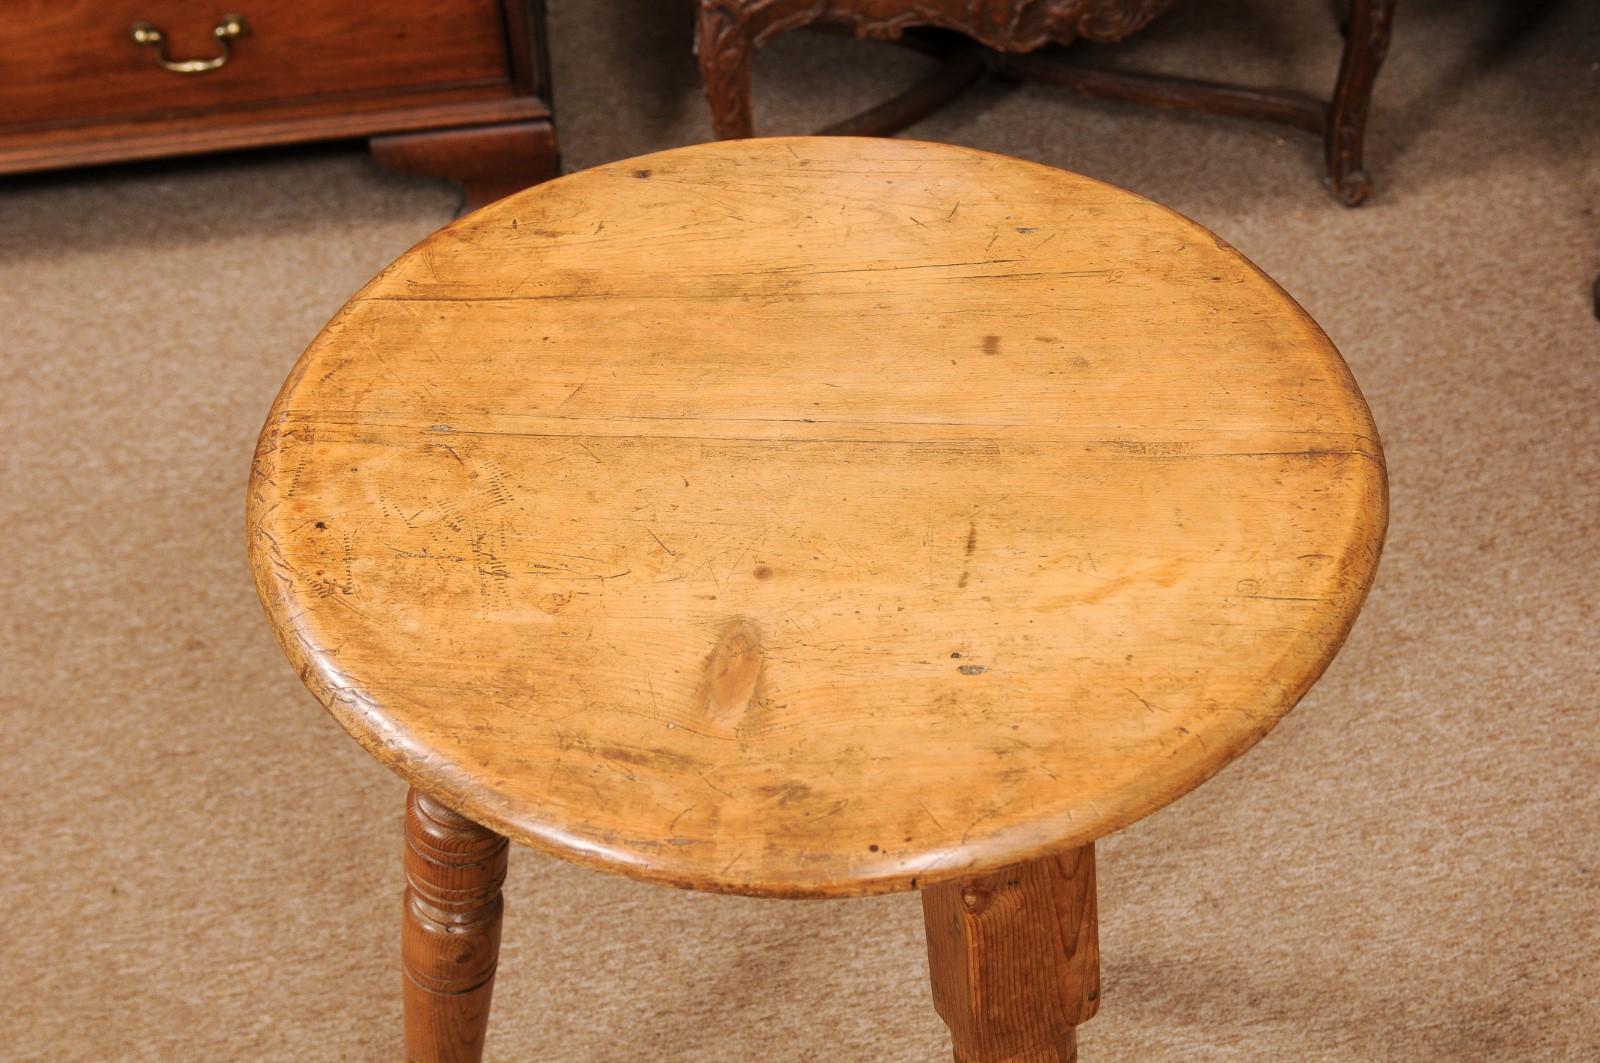  Late 19th Century English Pine Cricket Table with Turned Legs For Sale 3